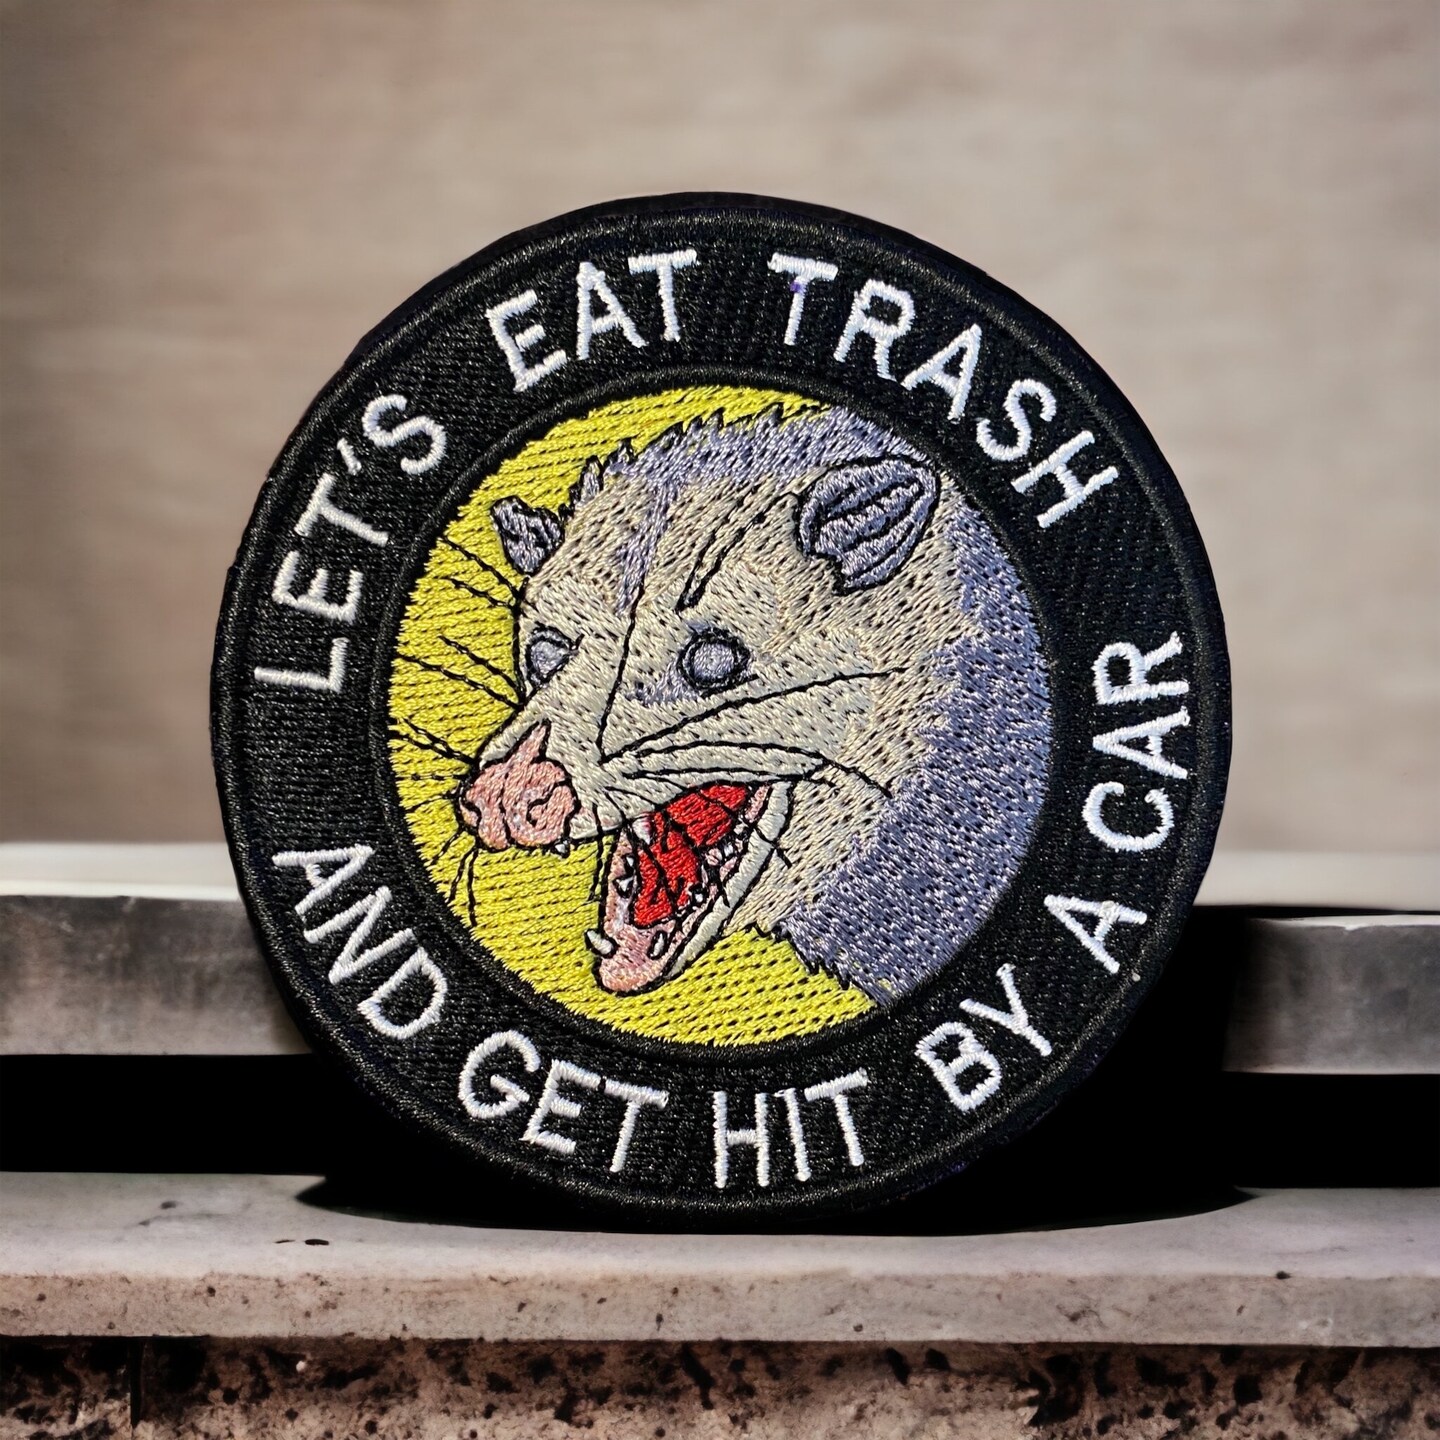 3-inch Round Patch dropped Food Reclamation Specialist Funny Patch